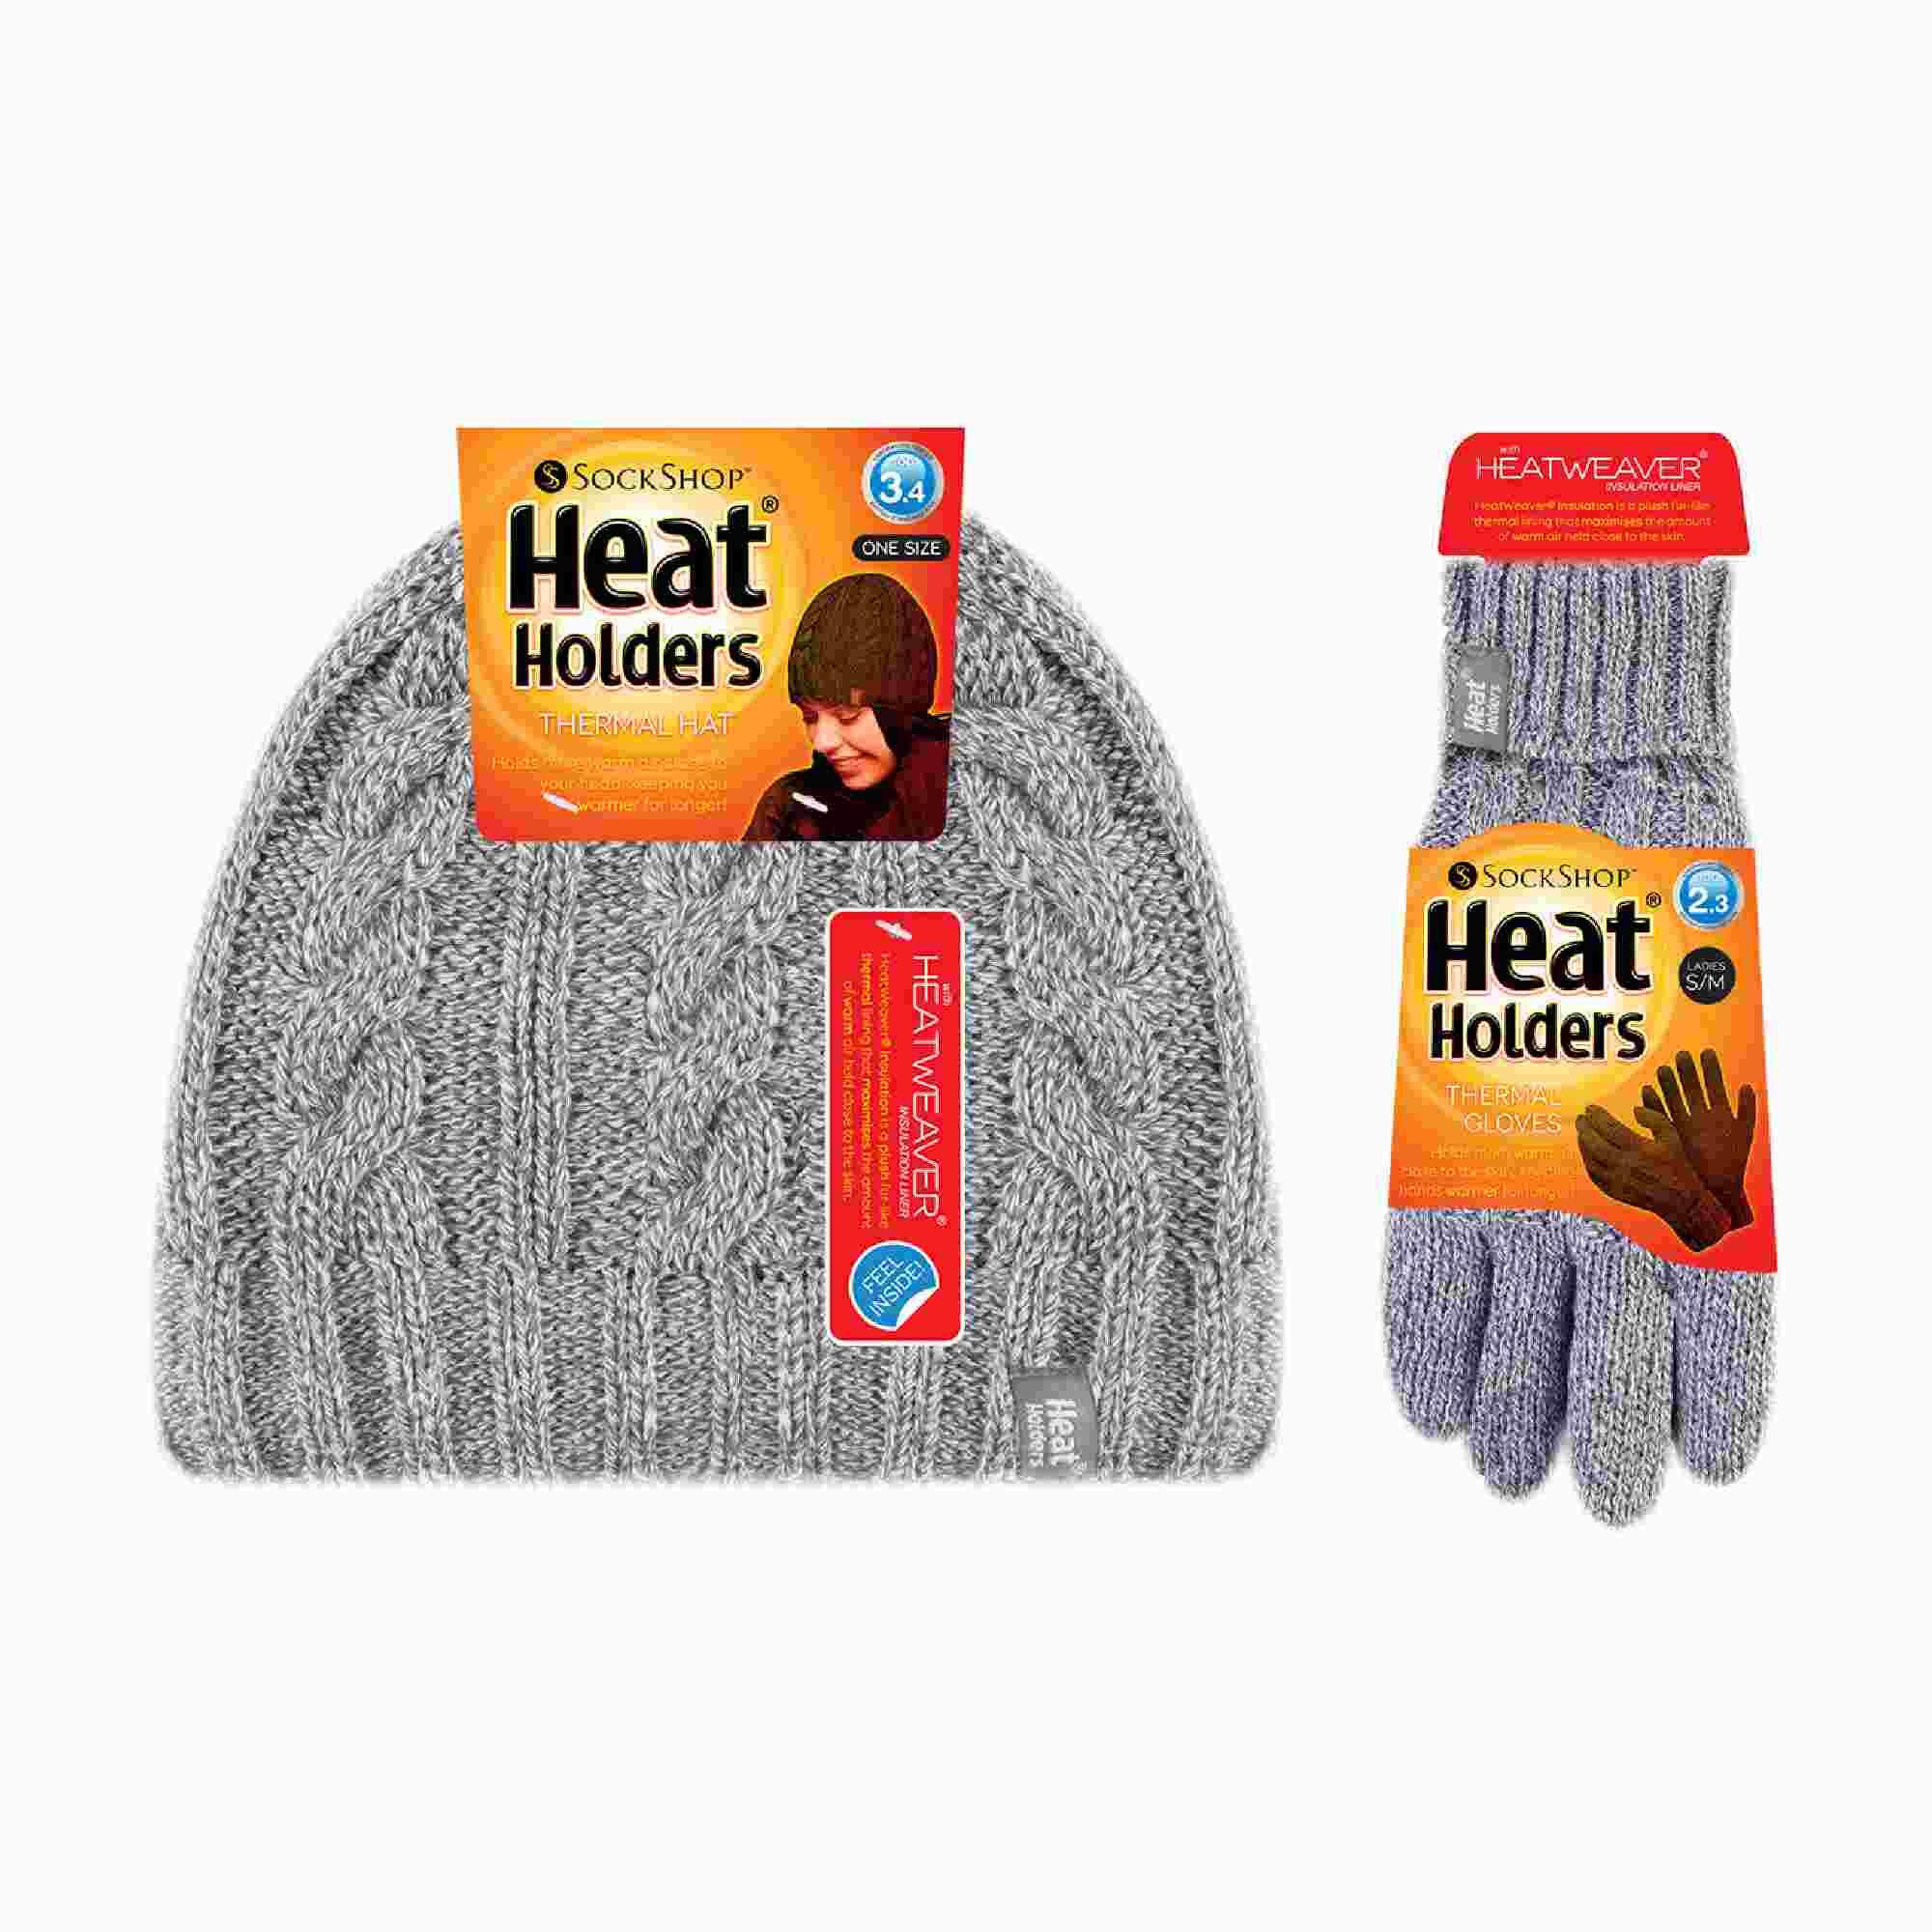 Ladies Fleece Lined Thermal Hat & Gloves Set for Winter 2/4